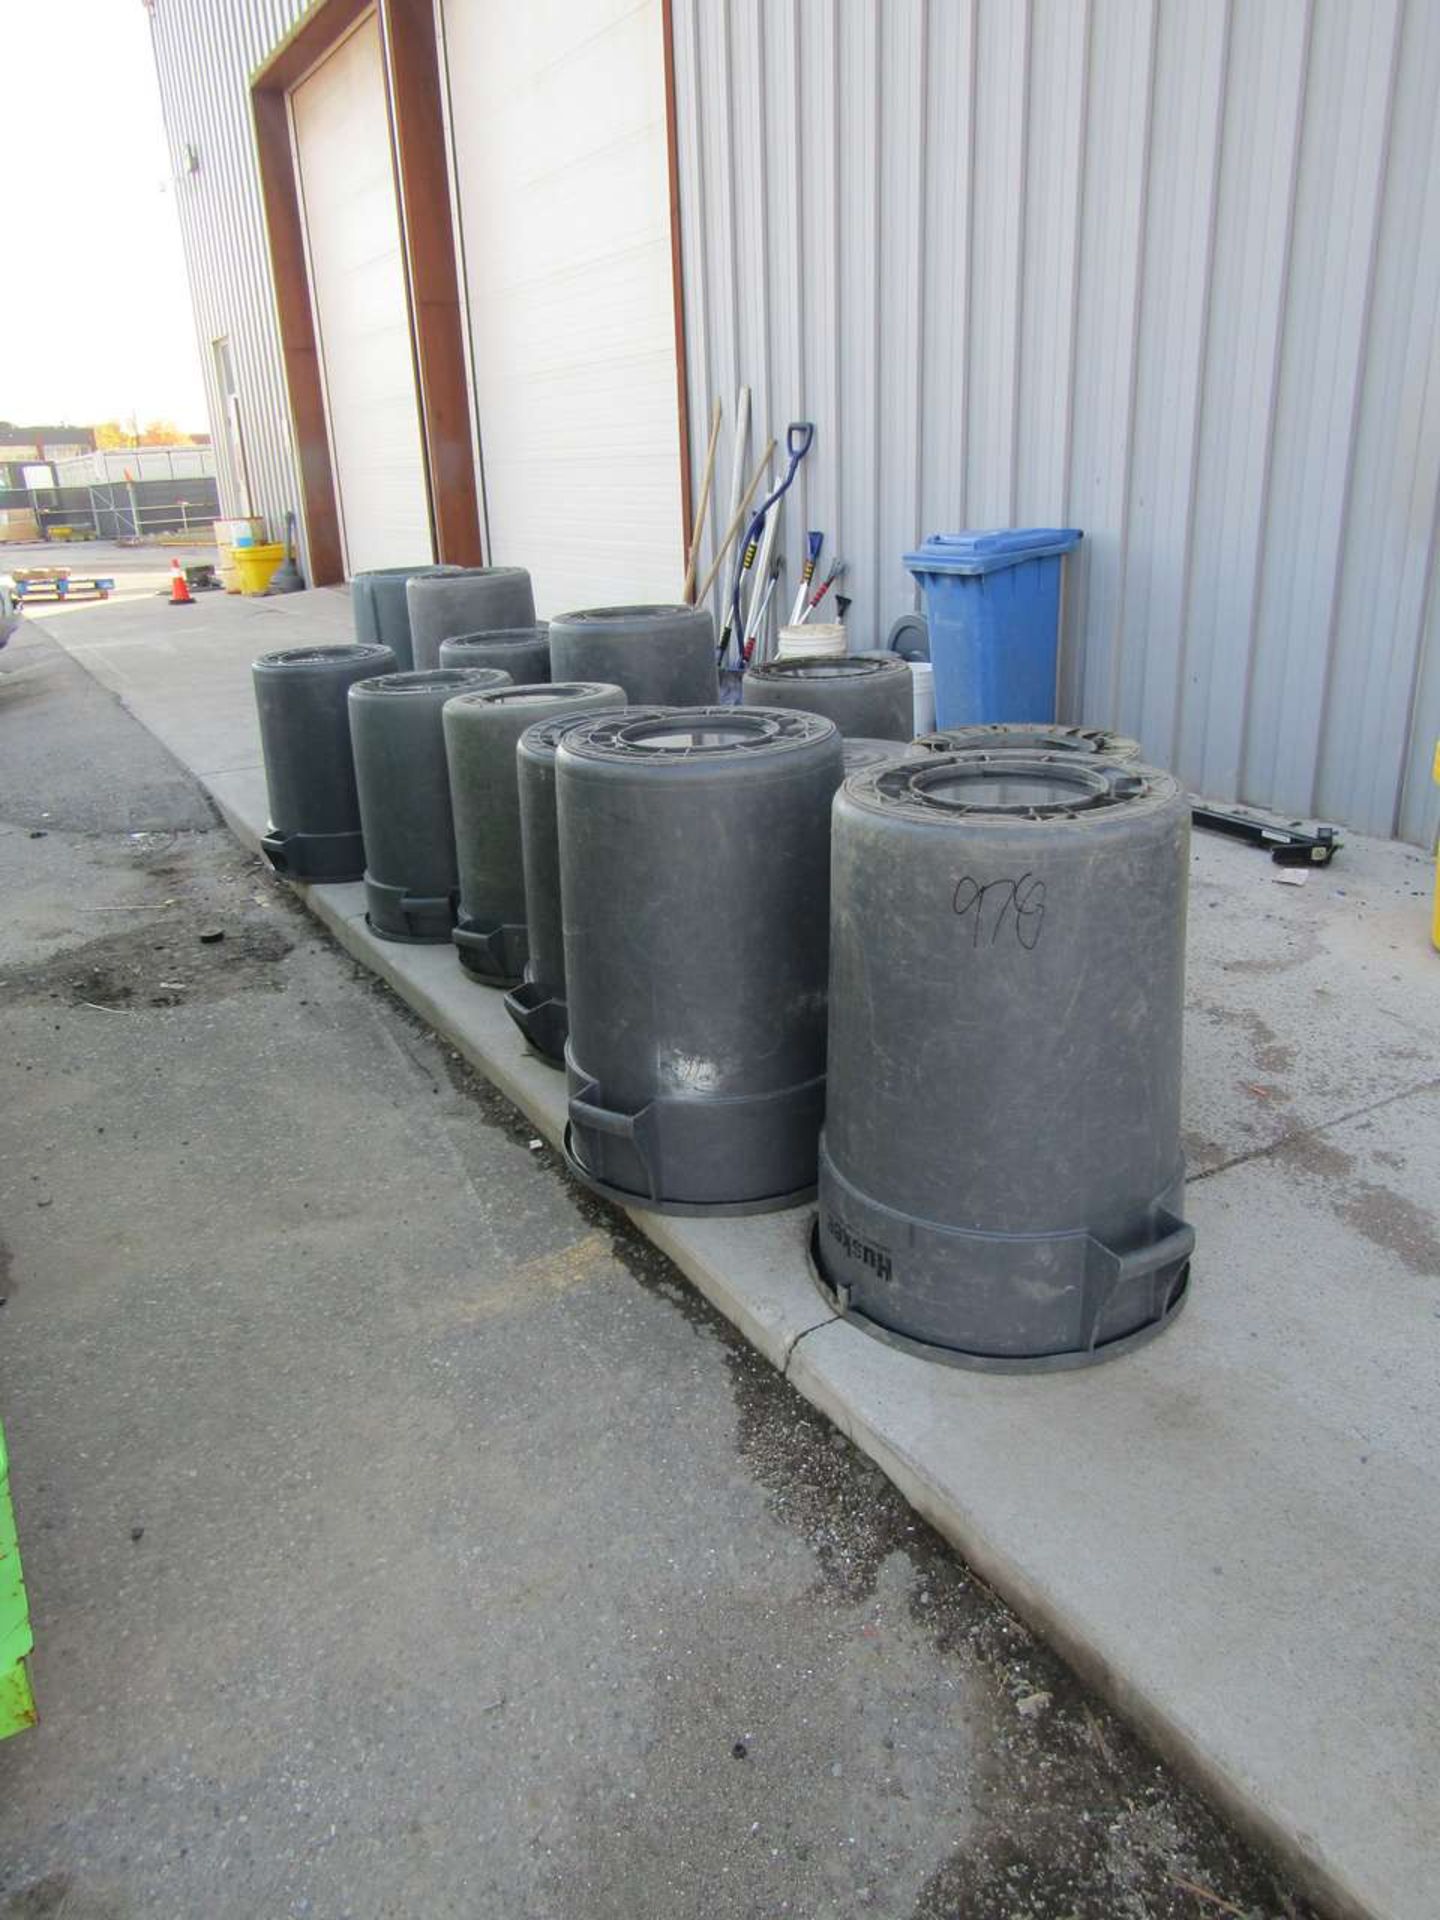 Garbage cans along outside wall